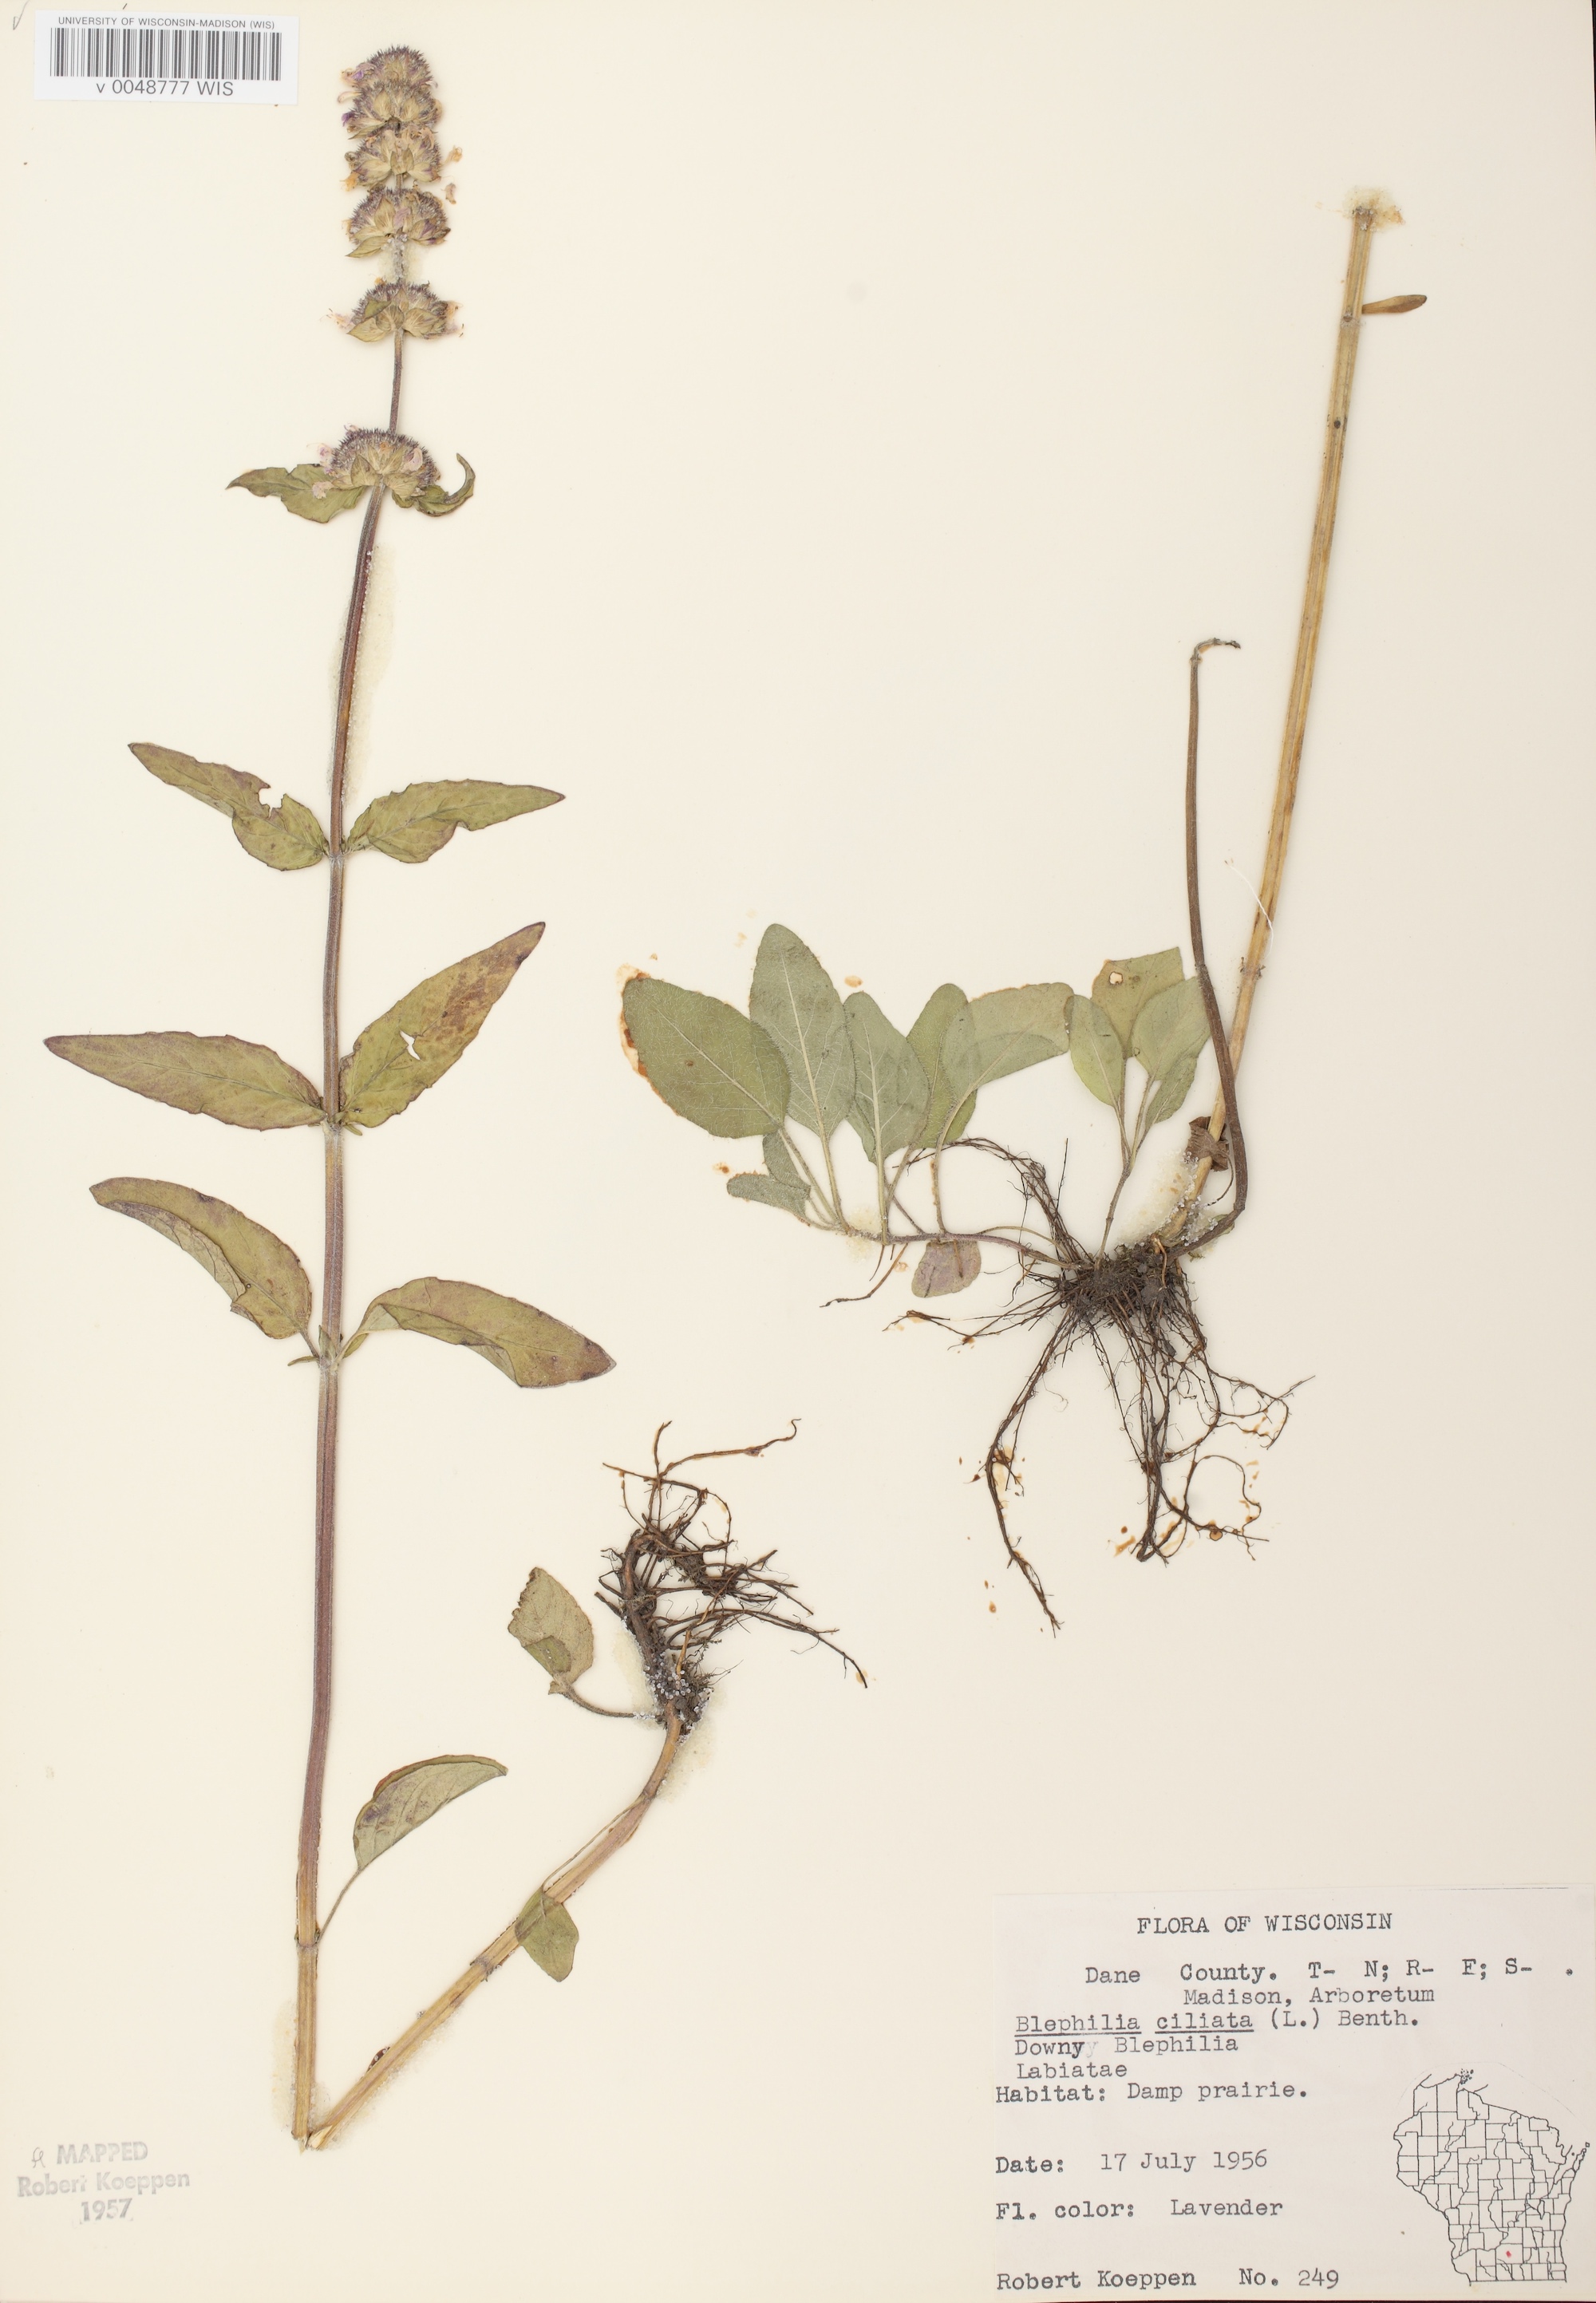 Downy Pagoda Plant specimen collected in the U.W. Arbortetum in Dane County on July 17, 1956.